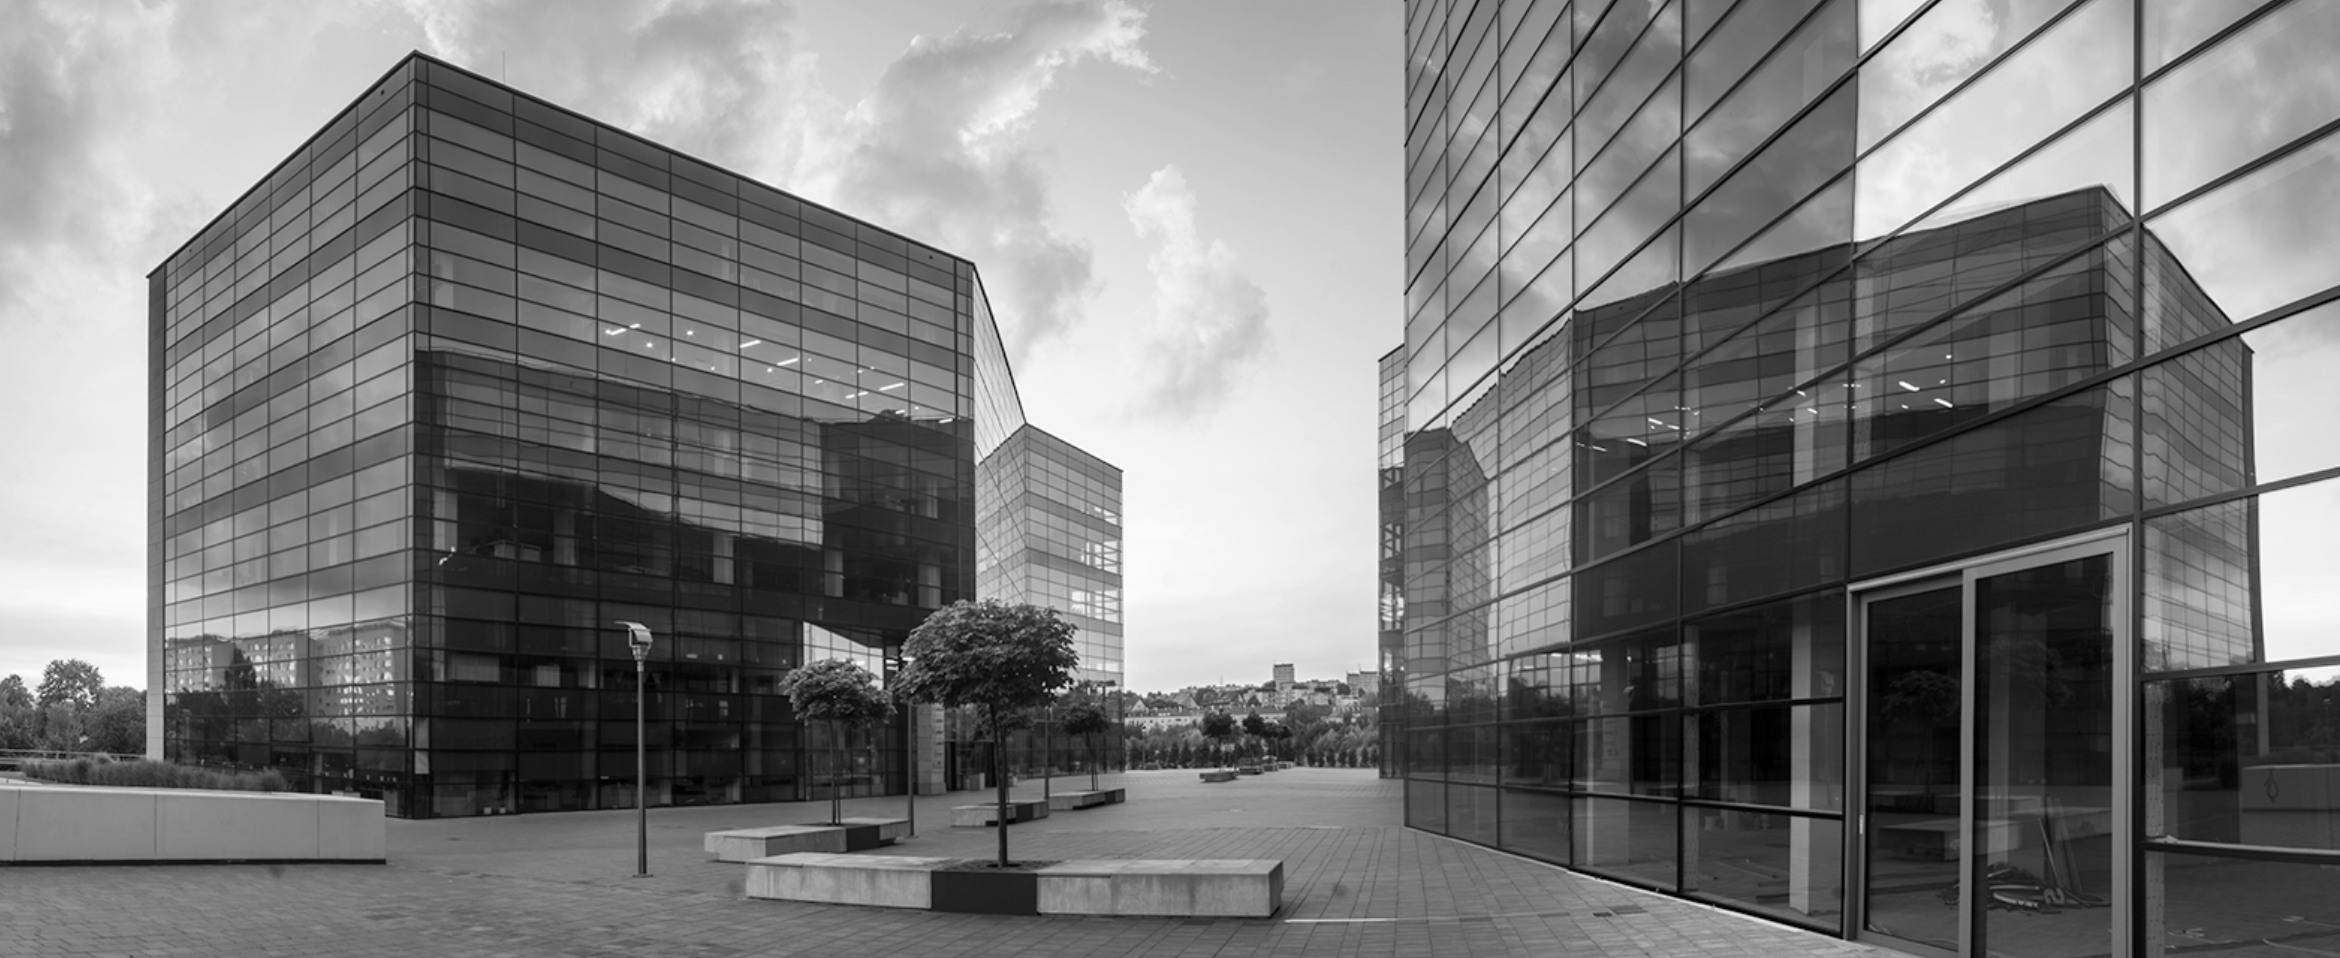 CRD offices in black and white